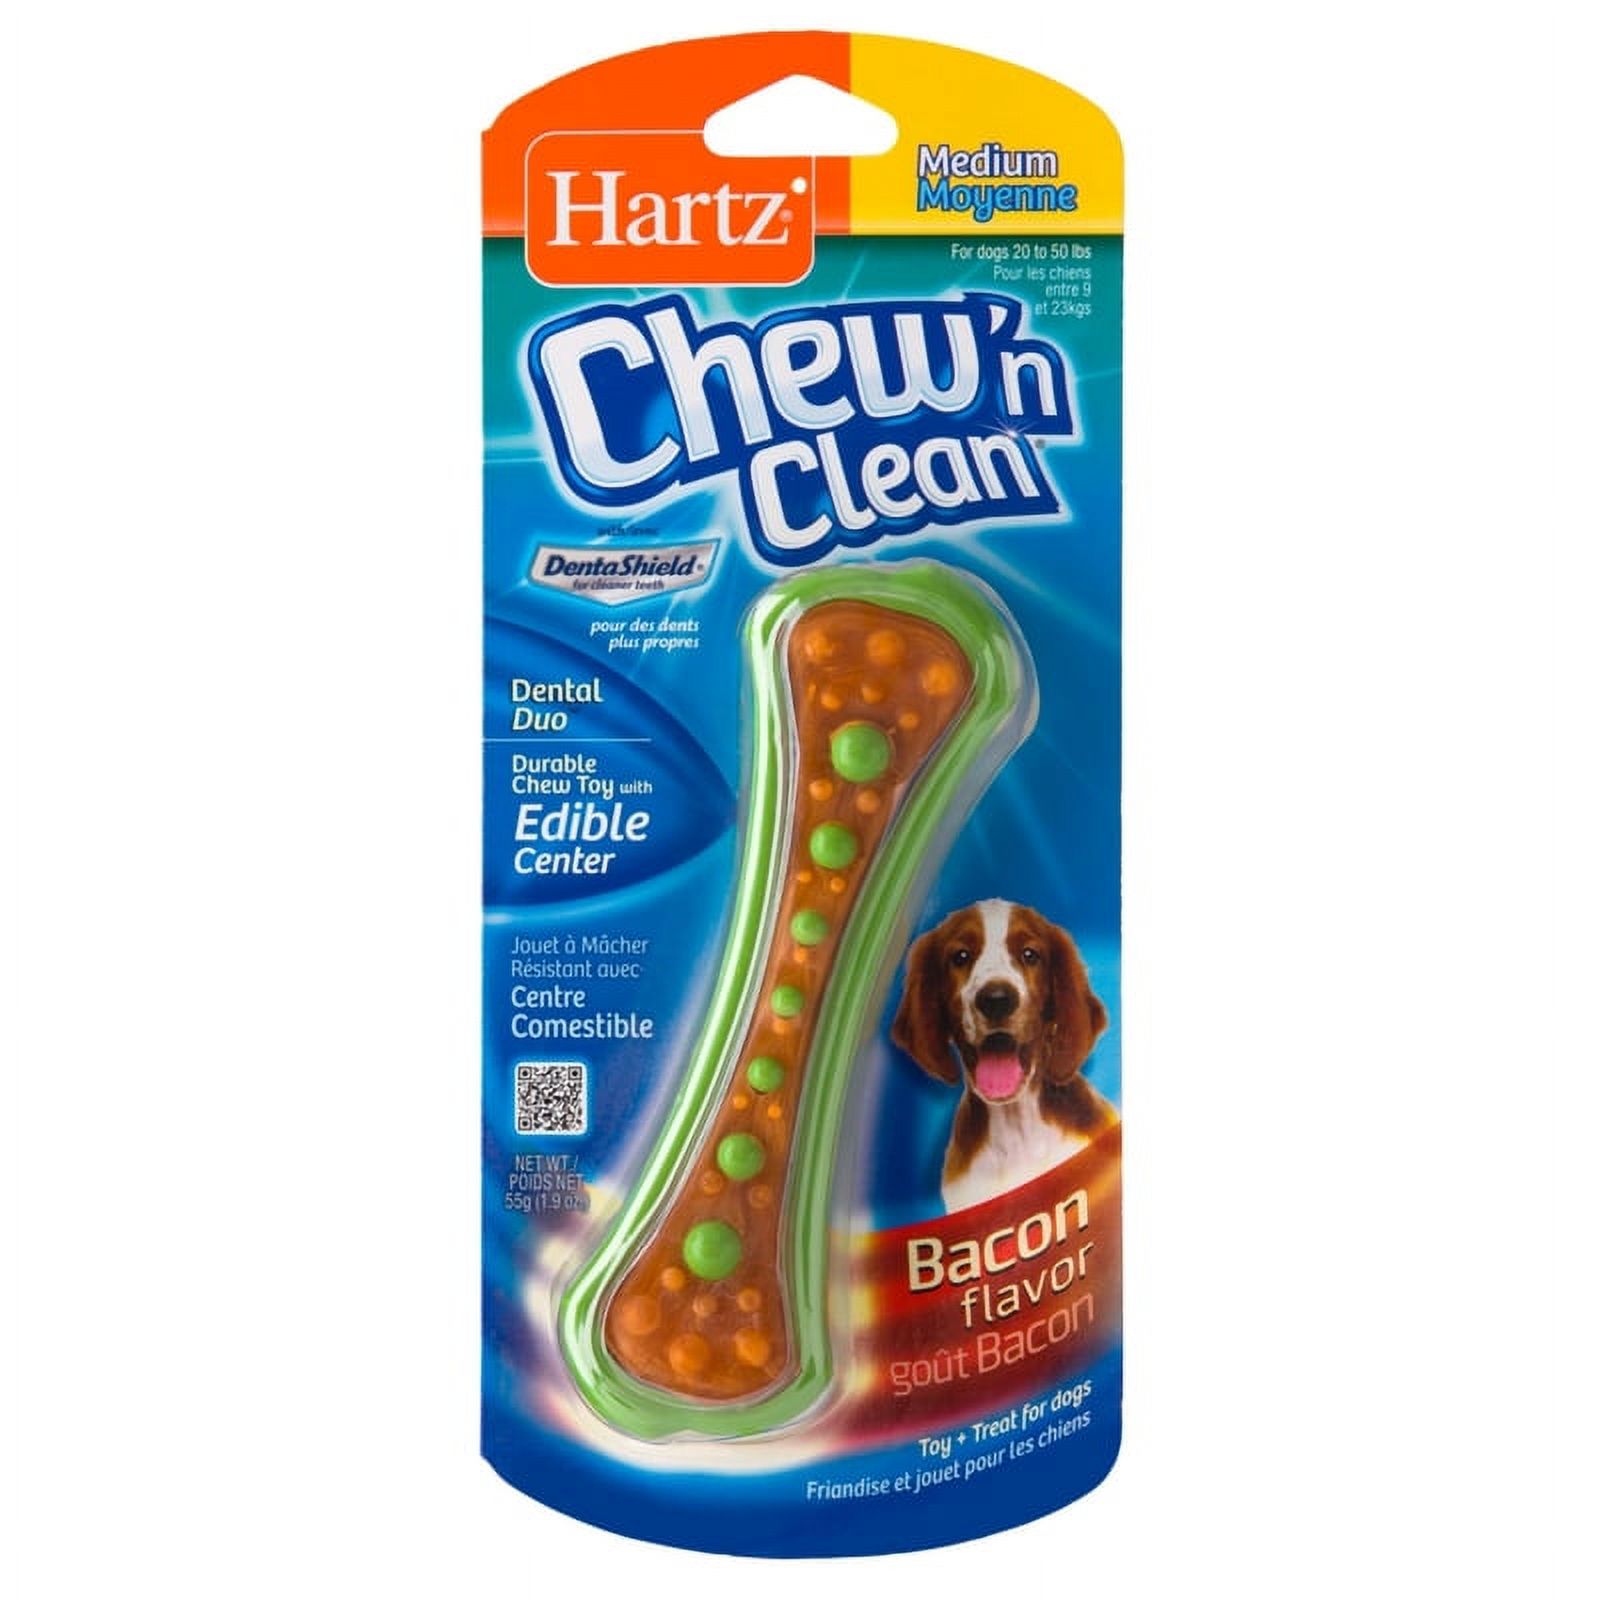 Hartz Chew 'n Clean Dental Duo Dog Toy, Medium, Color May Vary - image 1 of 8